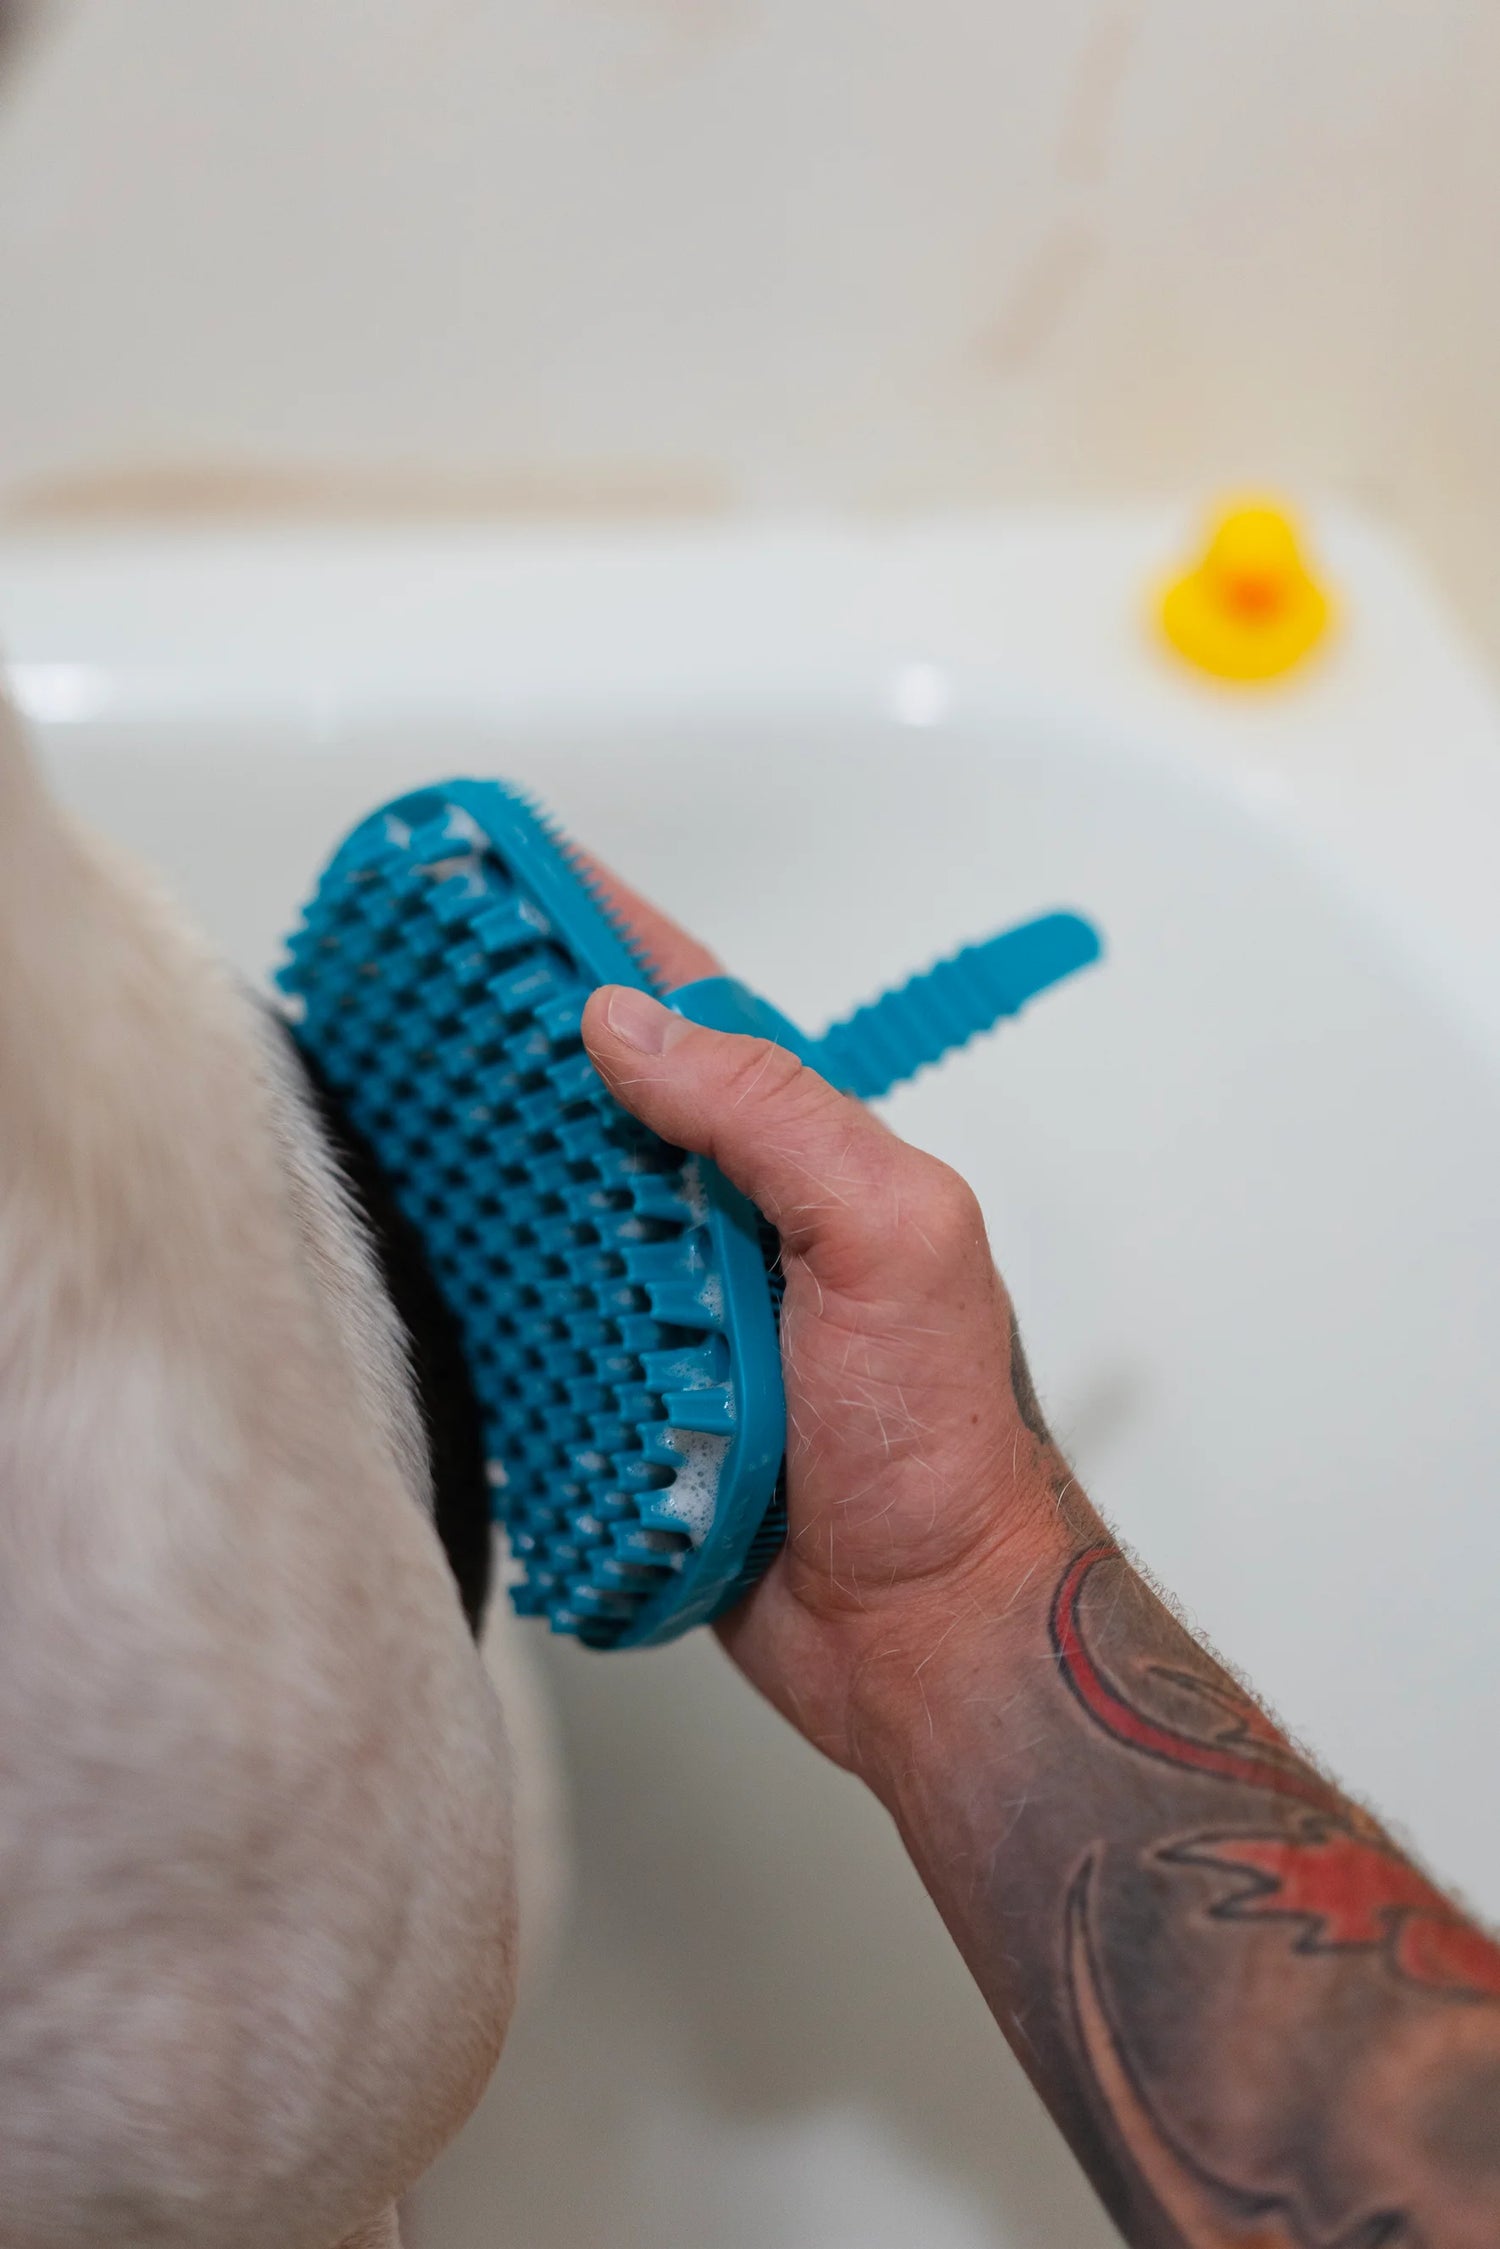 Blue reversible grooming brush wit hand strap being used in the bath.  